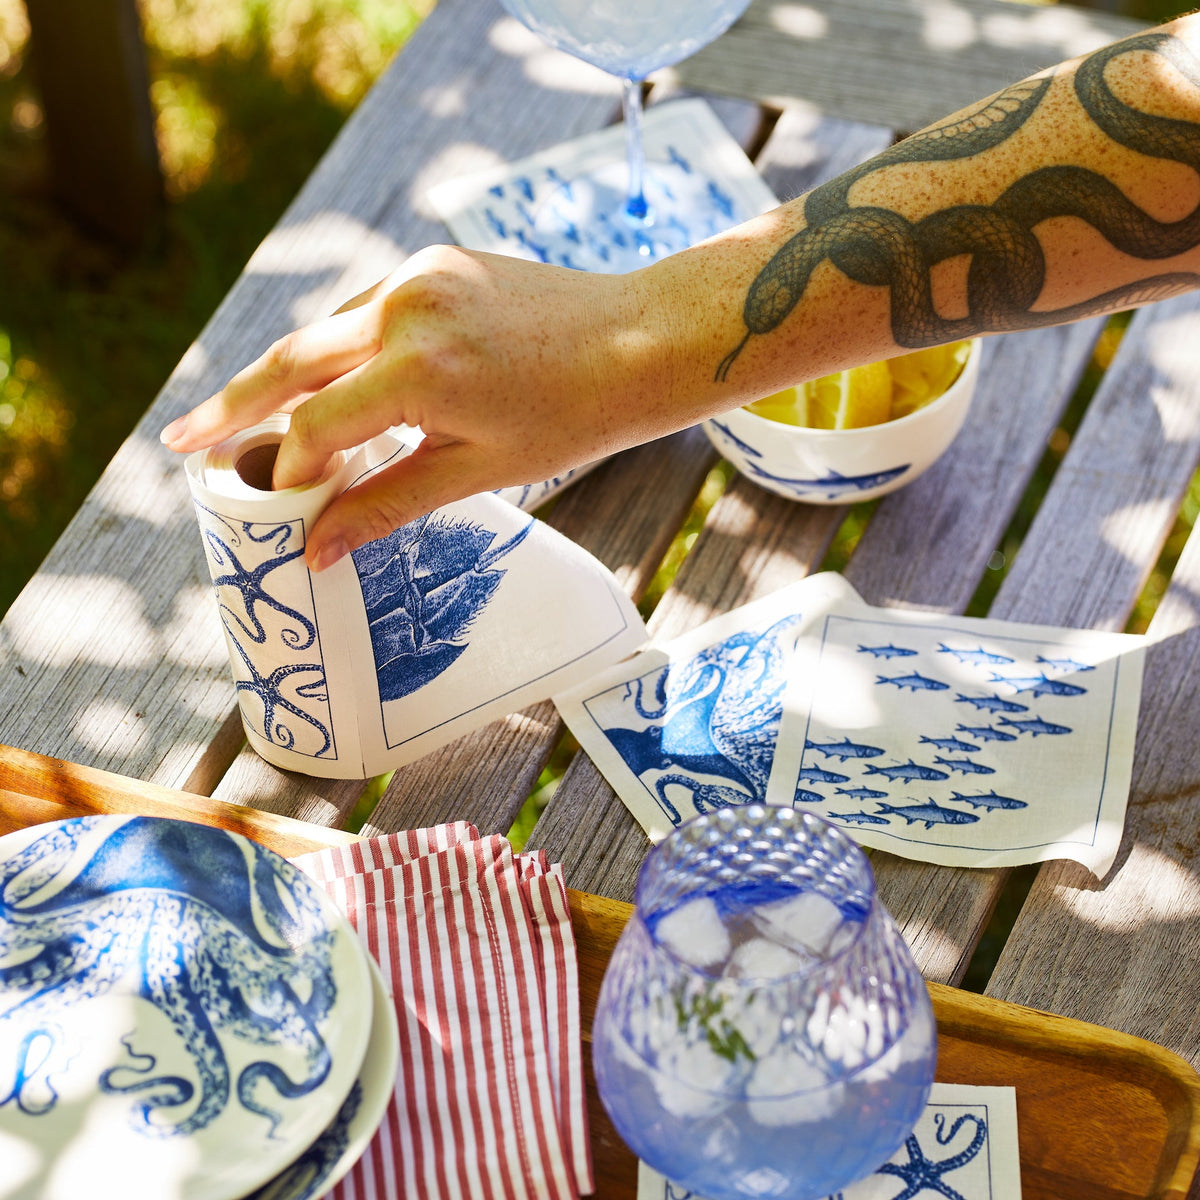 A person with tattoos hosting at a table with MY DRAP Coastal Cocktail Napkin Roll.